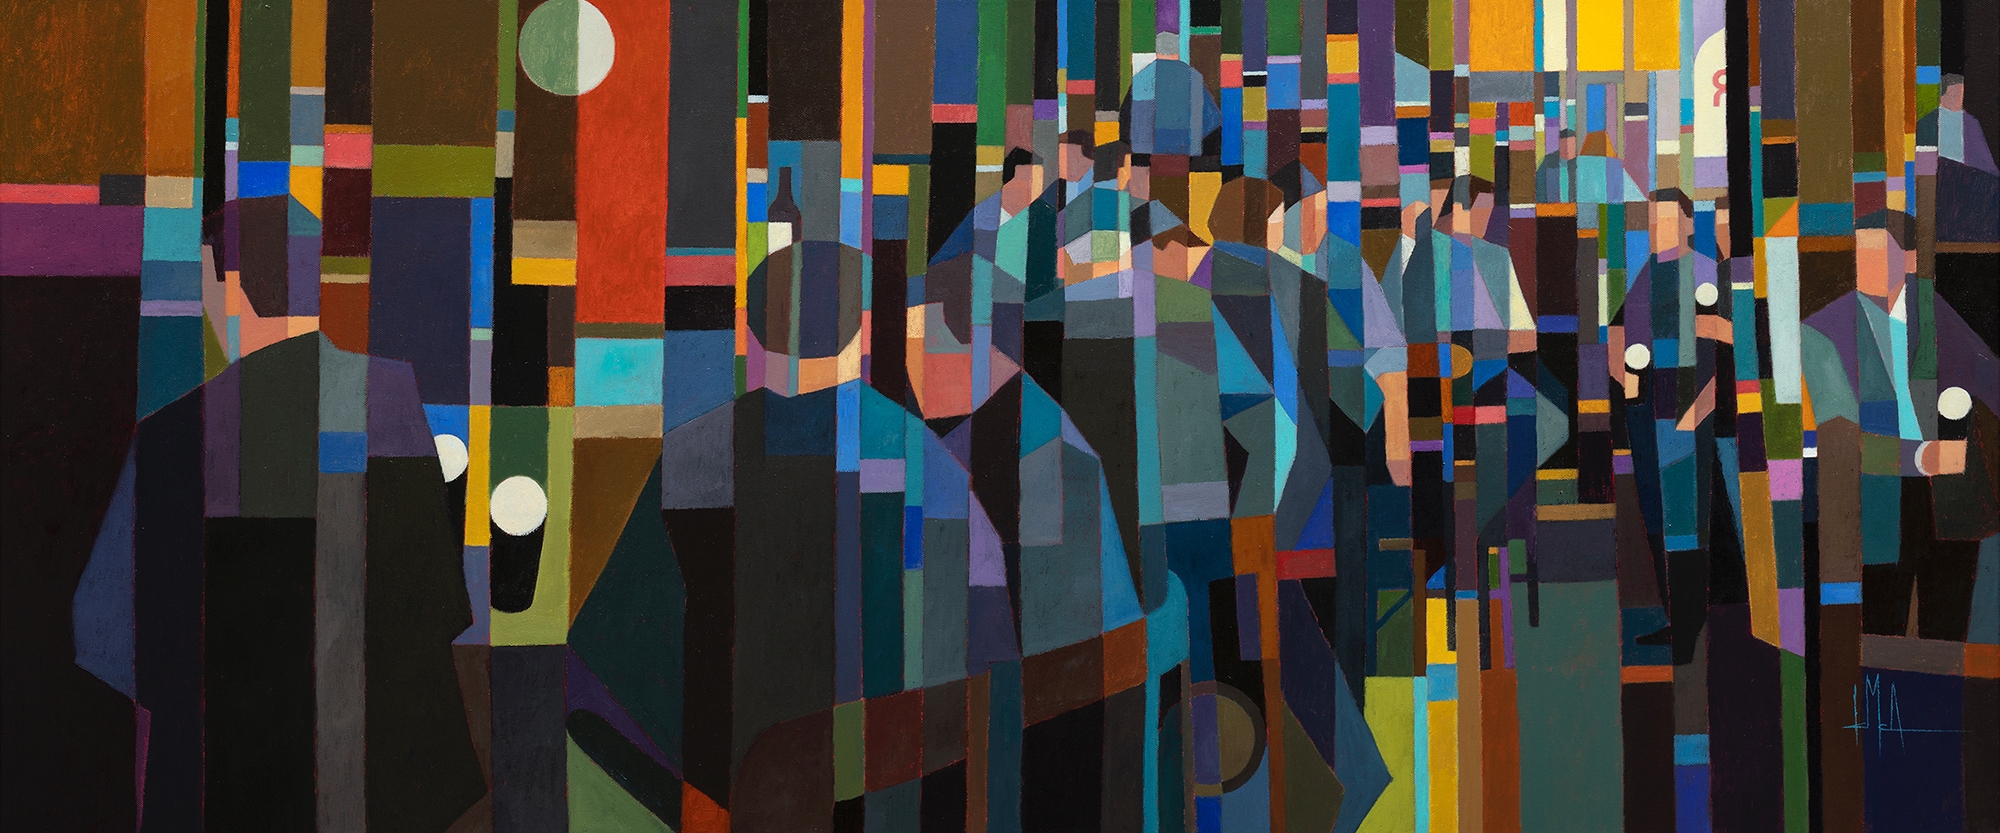 Irish Art - Questions and Answers with Artist Kevin McAleenan - Regulars (50x120cm)